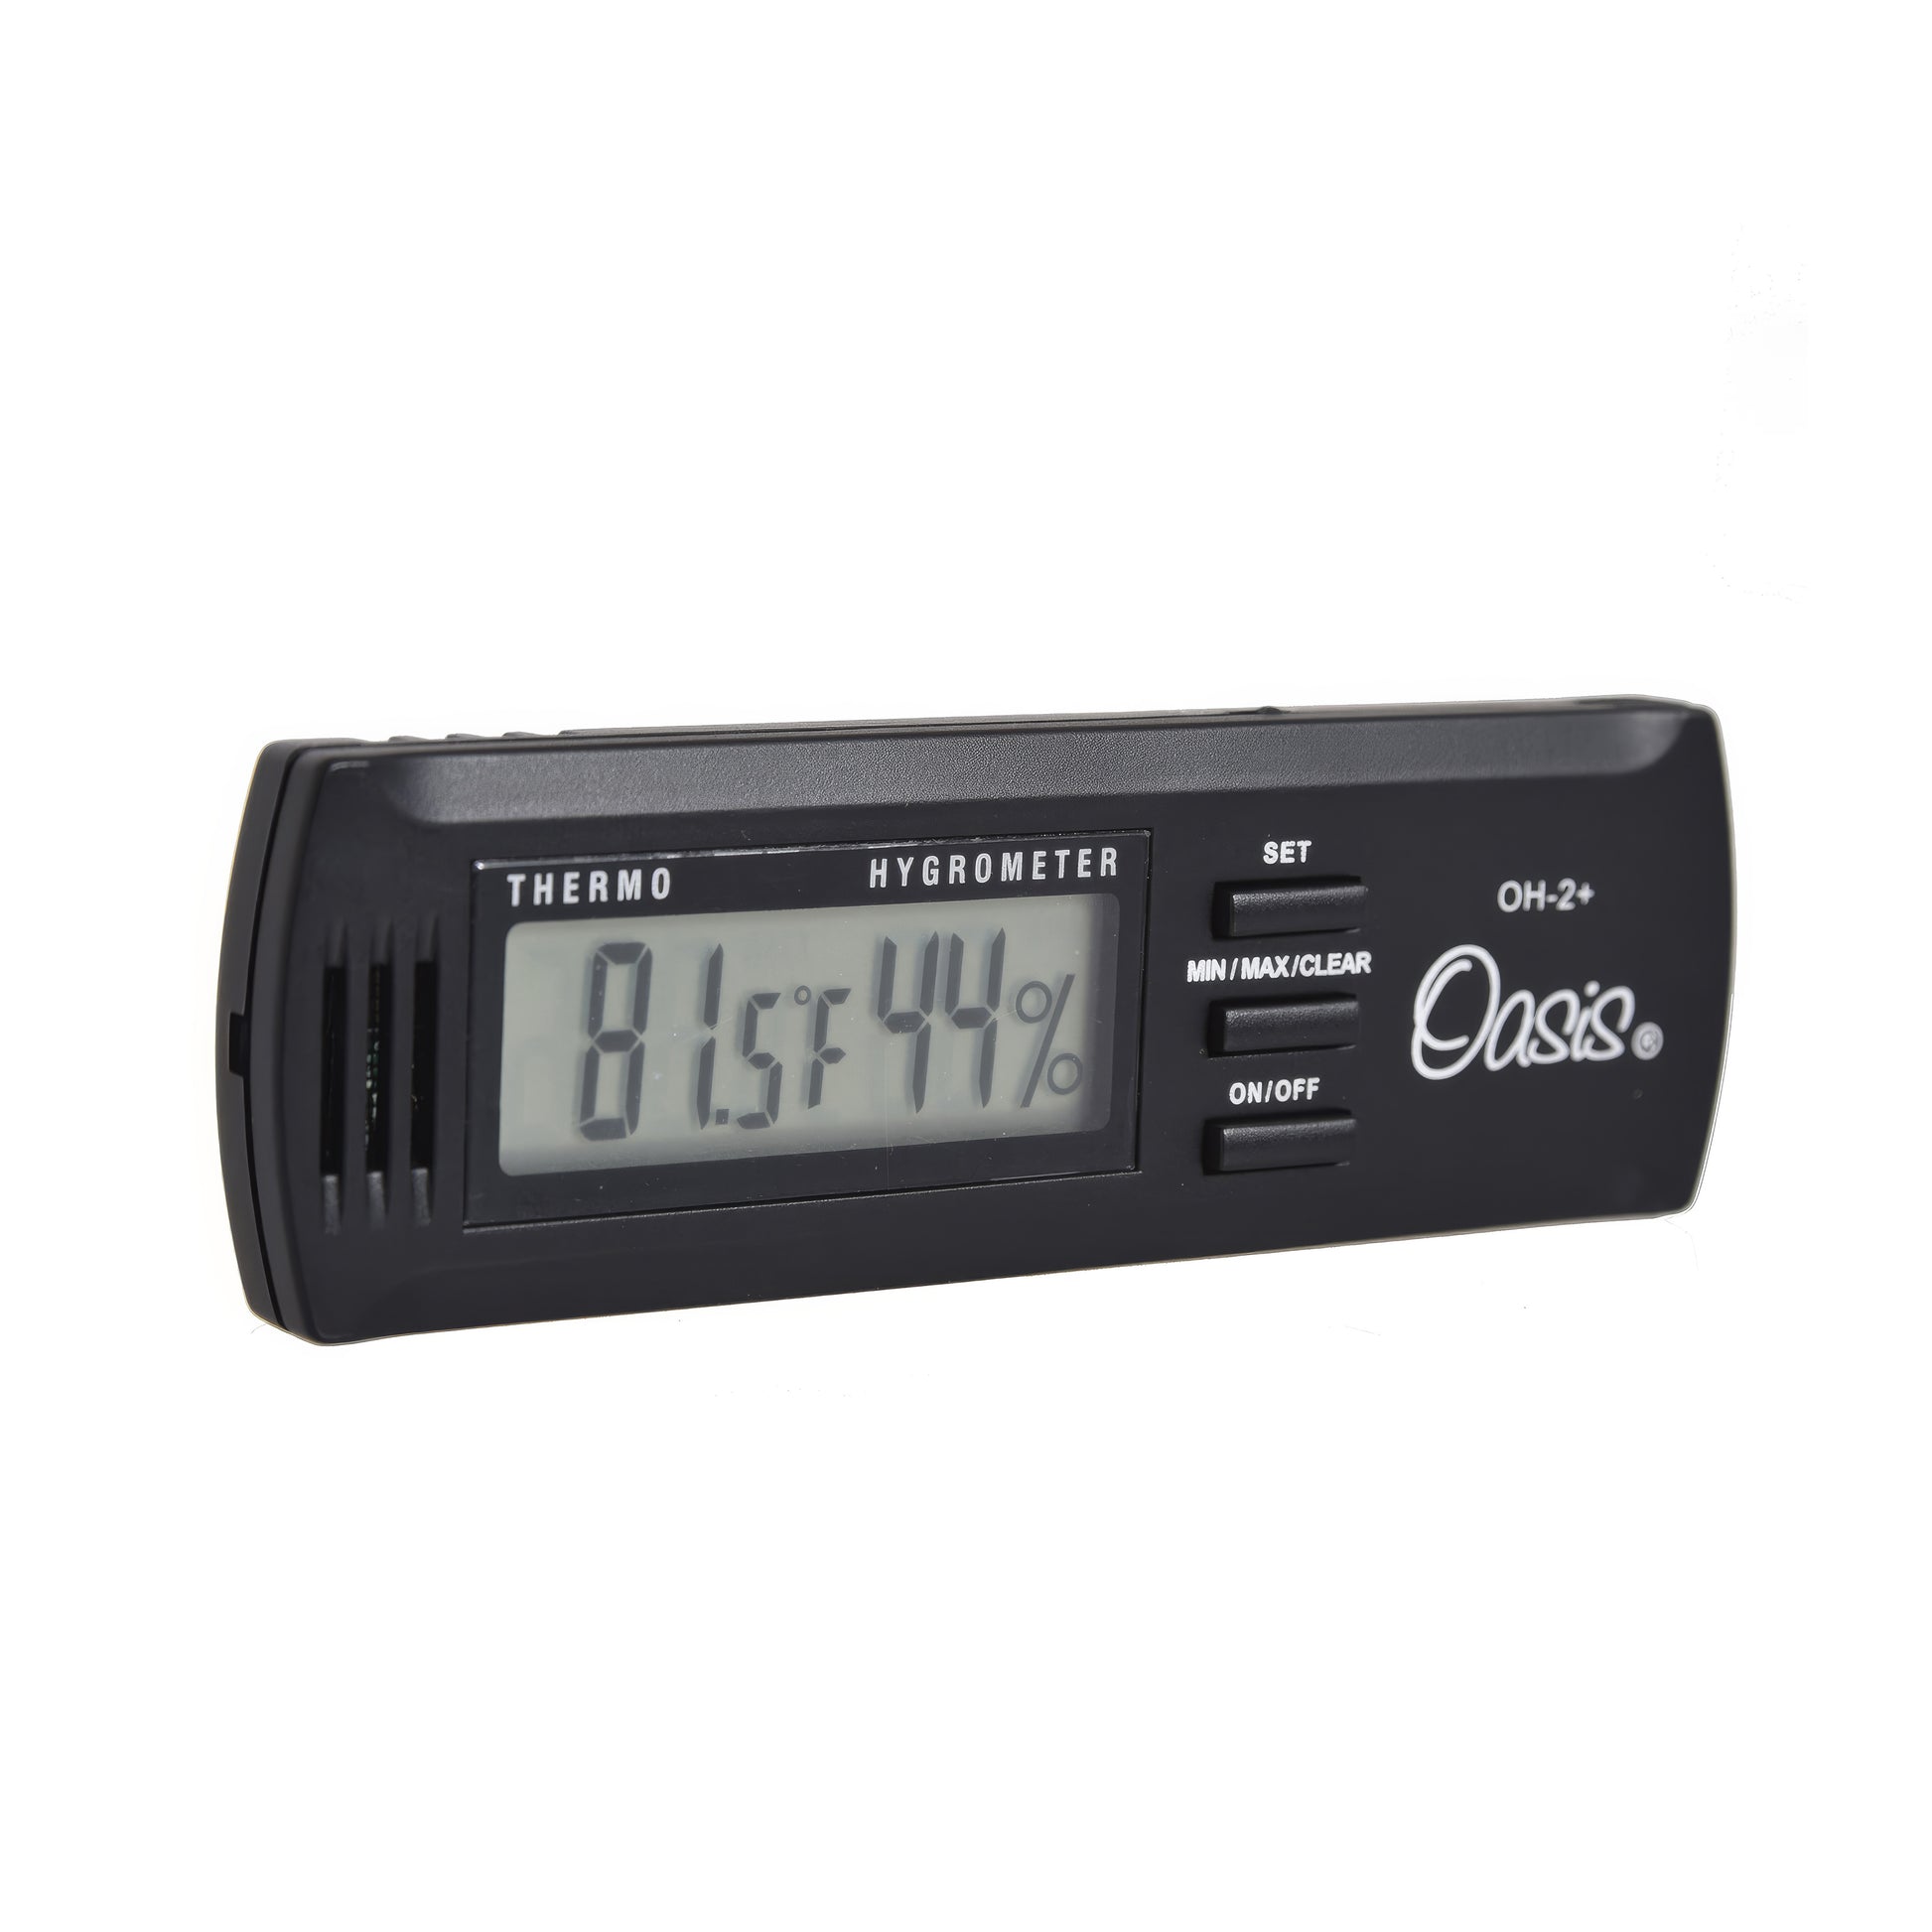 Oasis OH-2+ Hygrometer / Thermometer